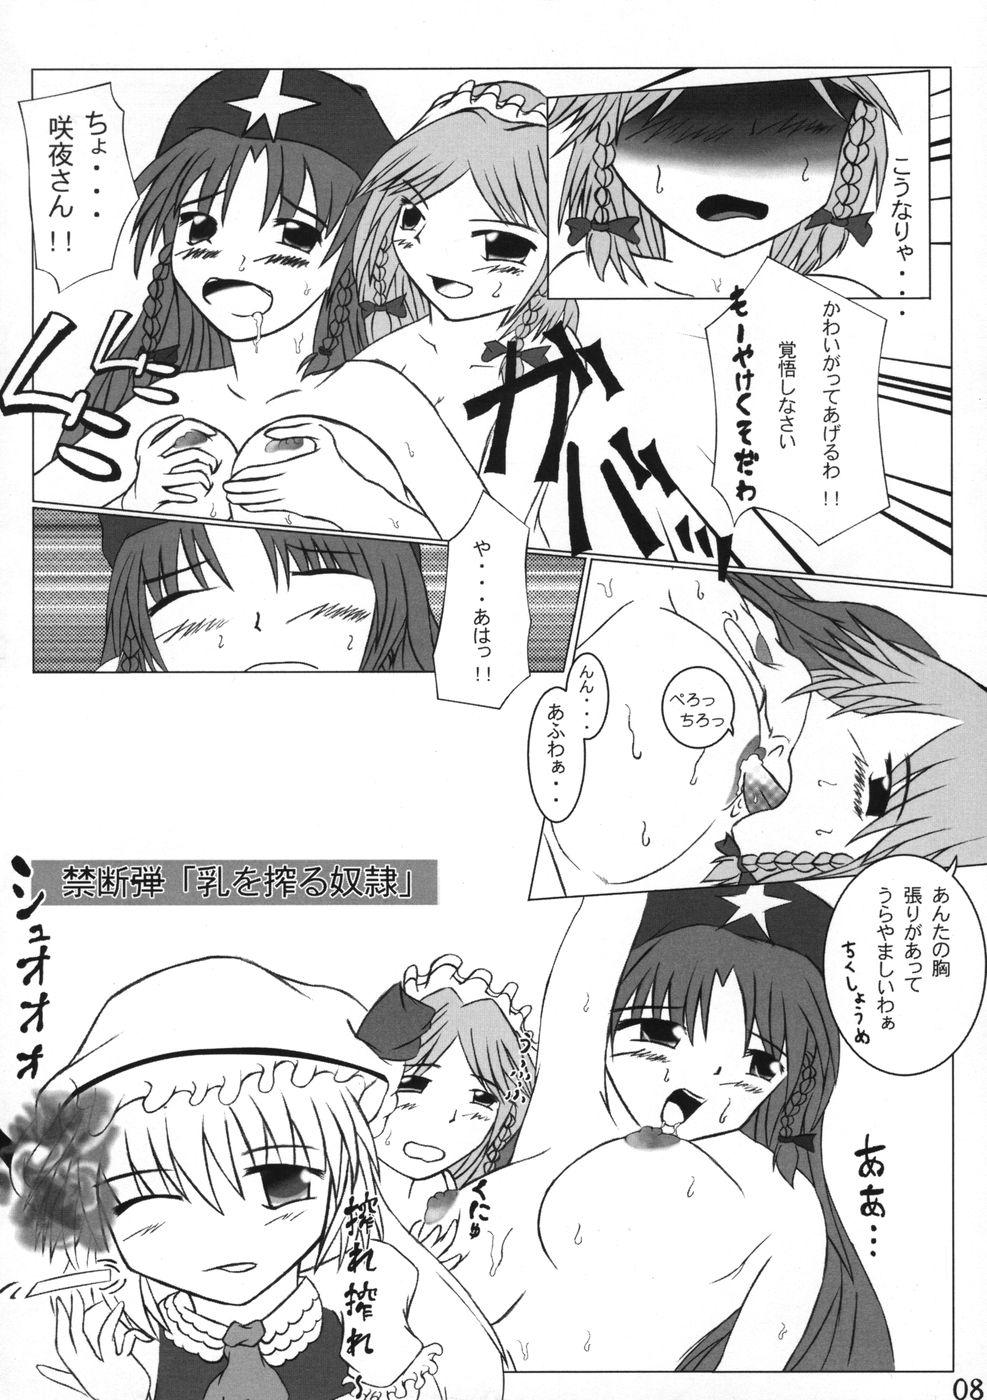 Bed 業創りし風 - Touhou project Gostoso - Page 8